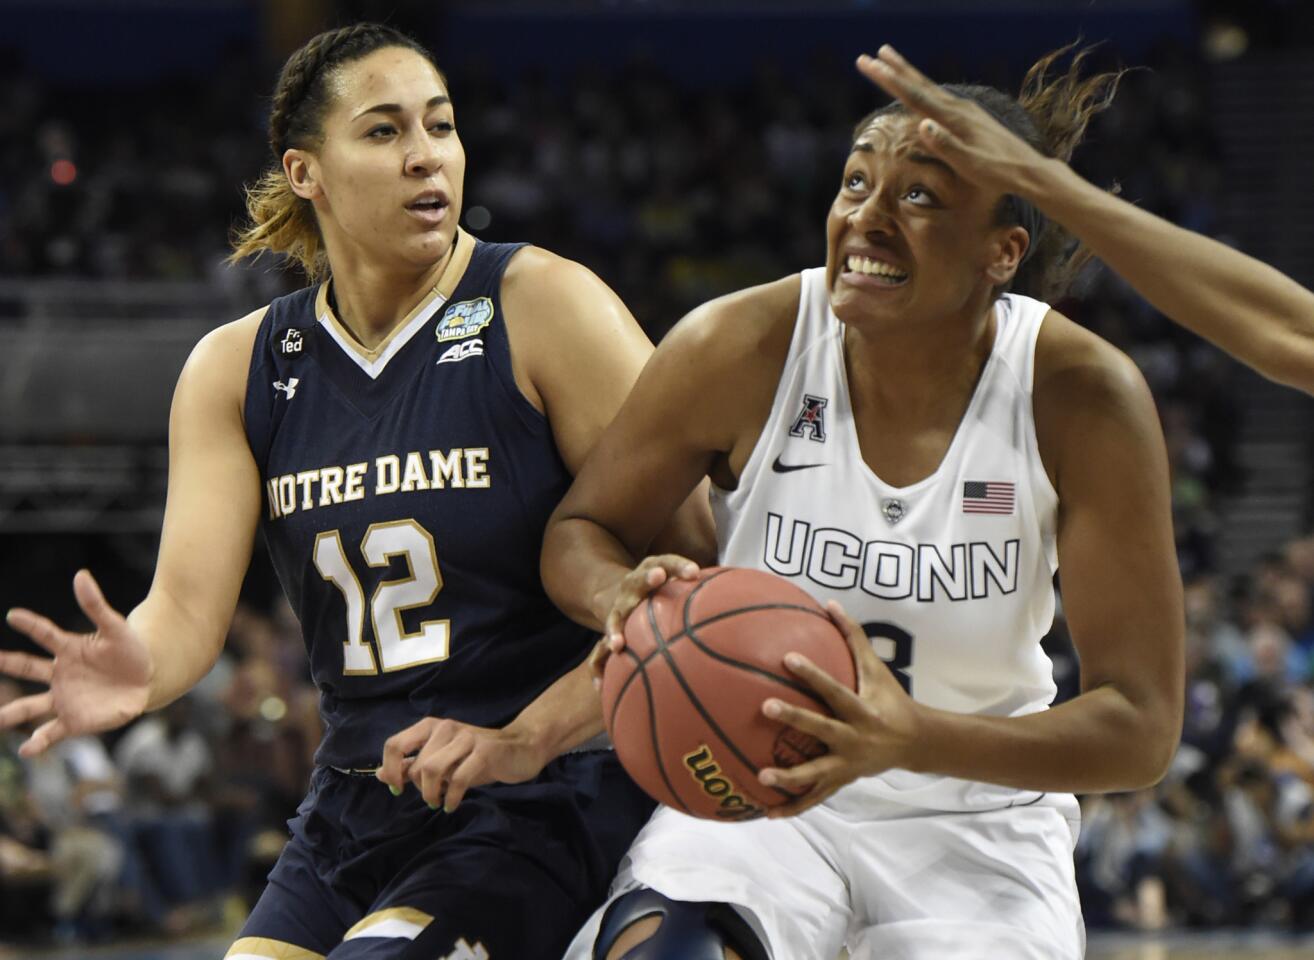 Notre Dame's Taya Reimer defends Morgan Tuck in the 1st half. UConn plays Notre Dame for the National Championship at Amalie Arena in Tampa, Florida.